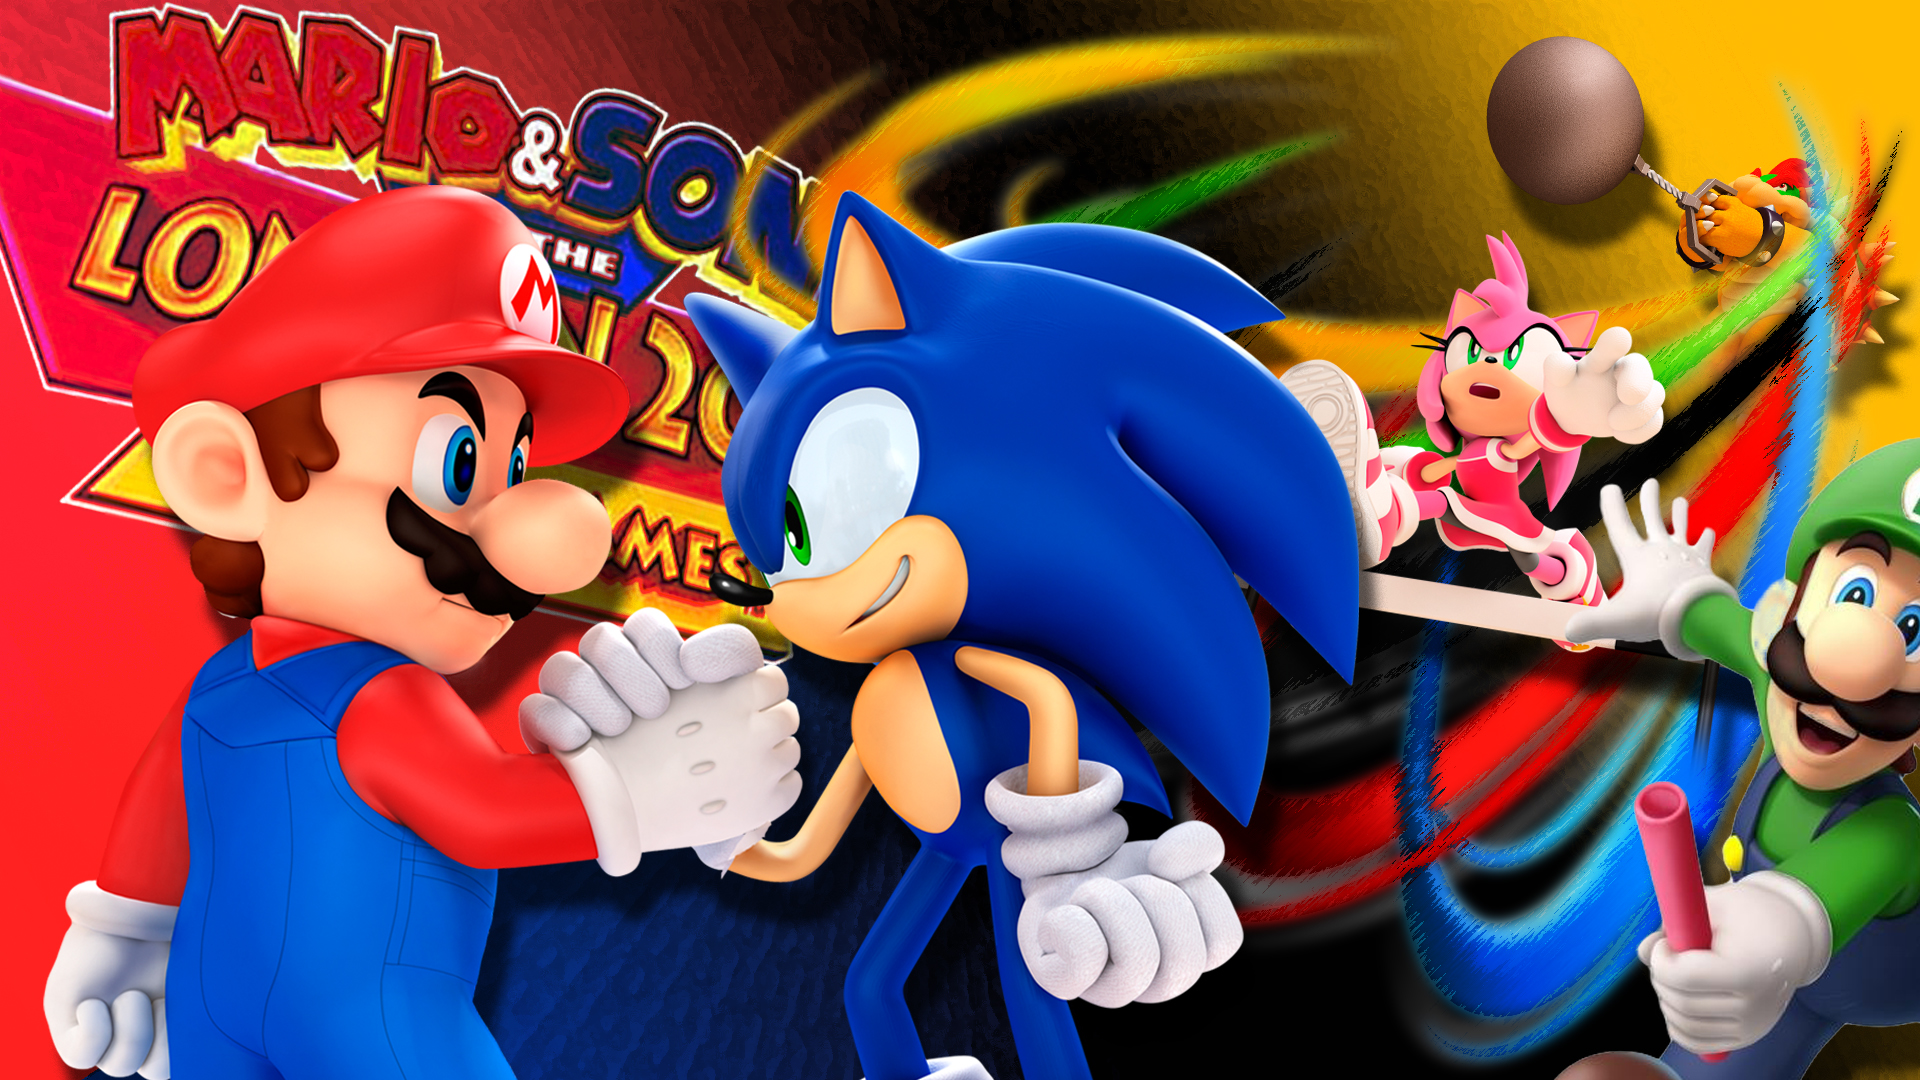 video game, mario & sonic at the london 2012 olympic games, mario